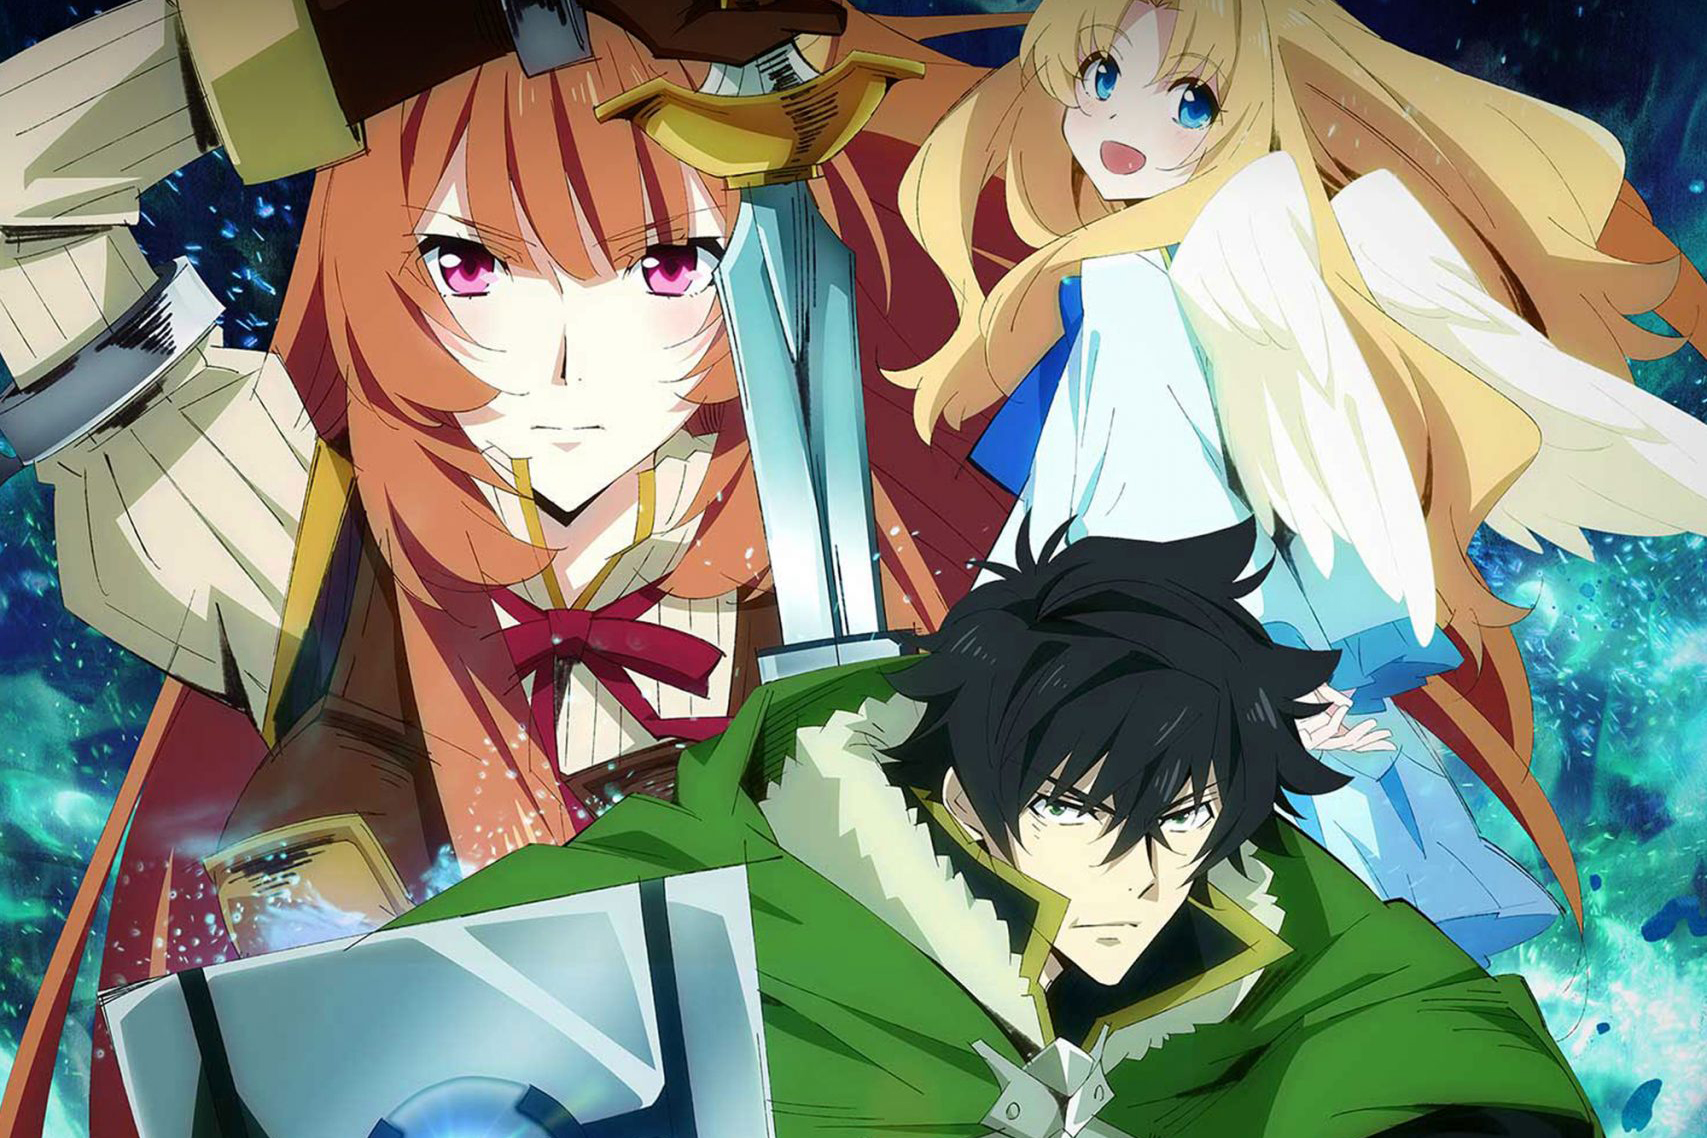 Best Anime of 2019 - The Rising of the Shield Hero